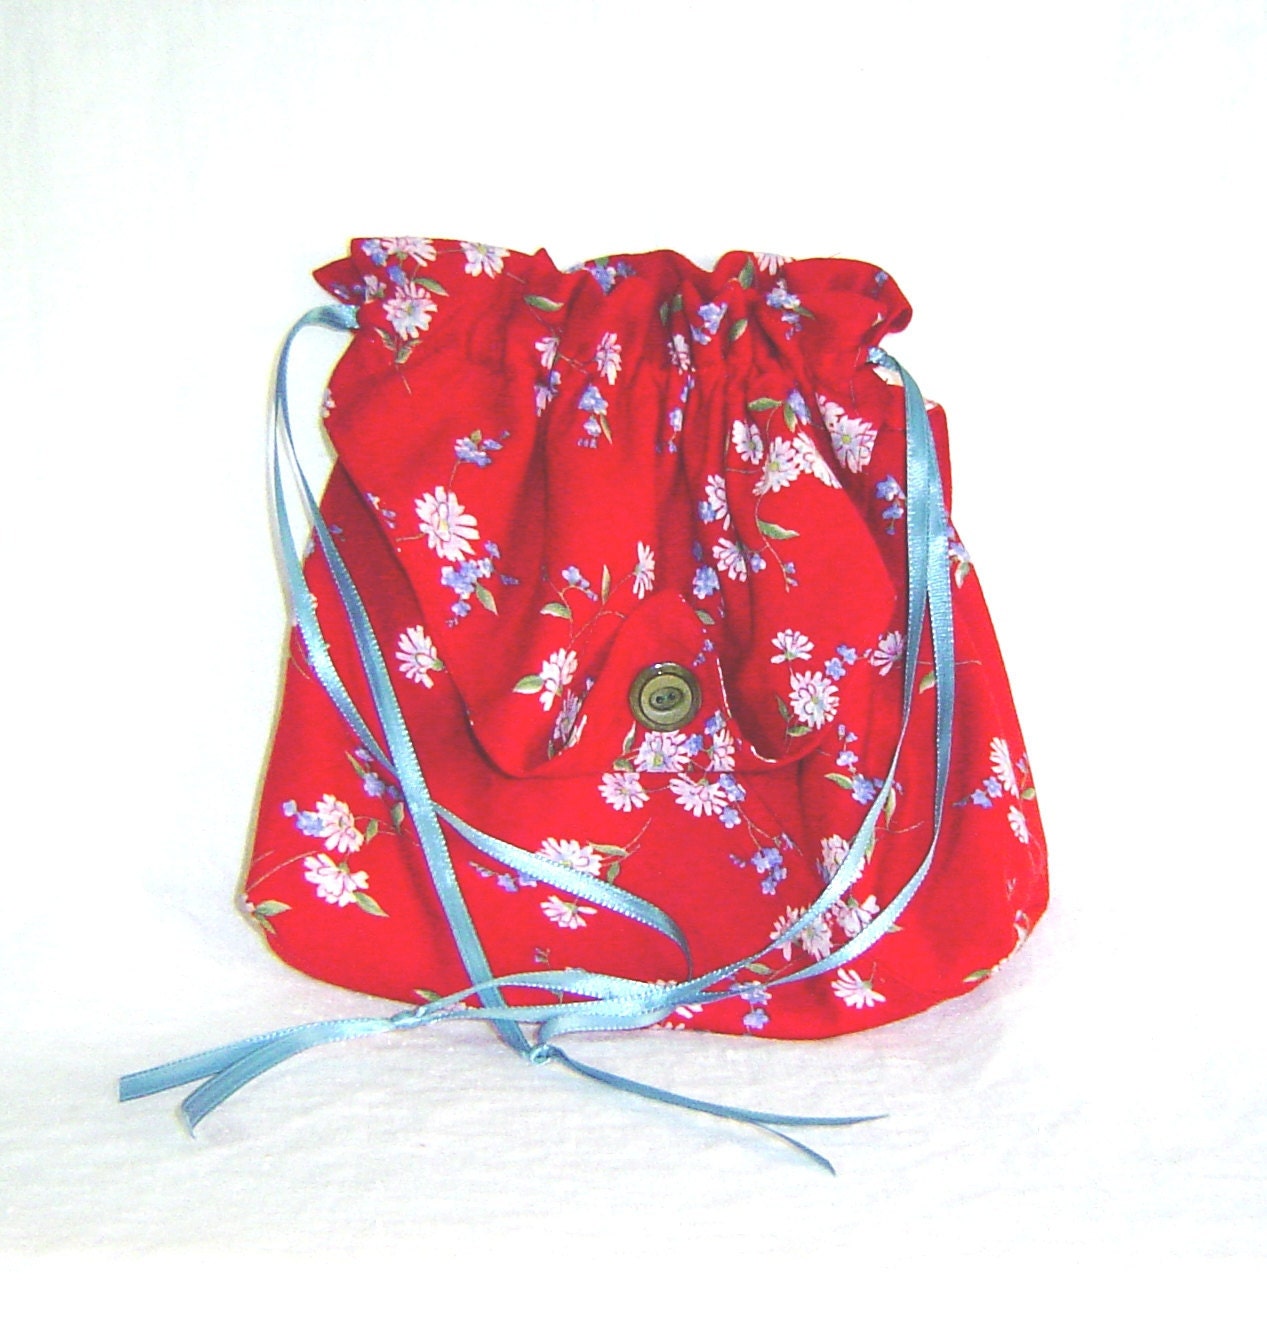 Drawstring bag daily tote handbag upcycled rayon red with pink and blue flowers - AccessoriesByKelli